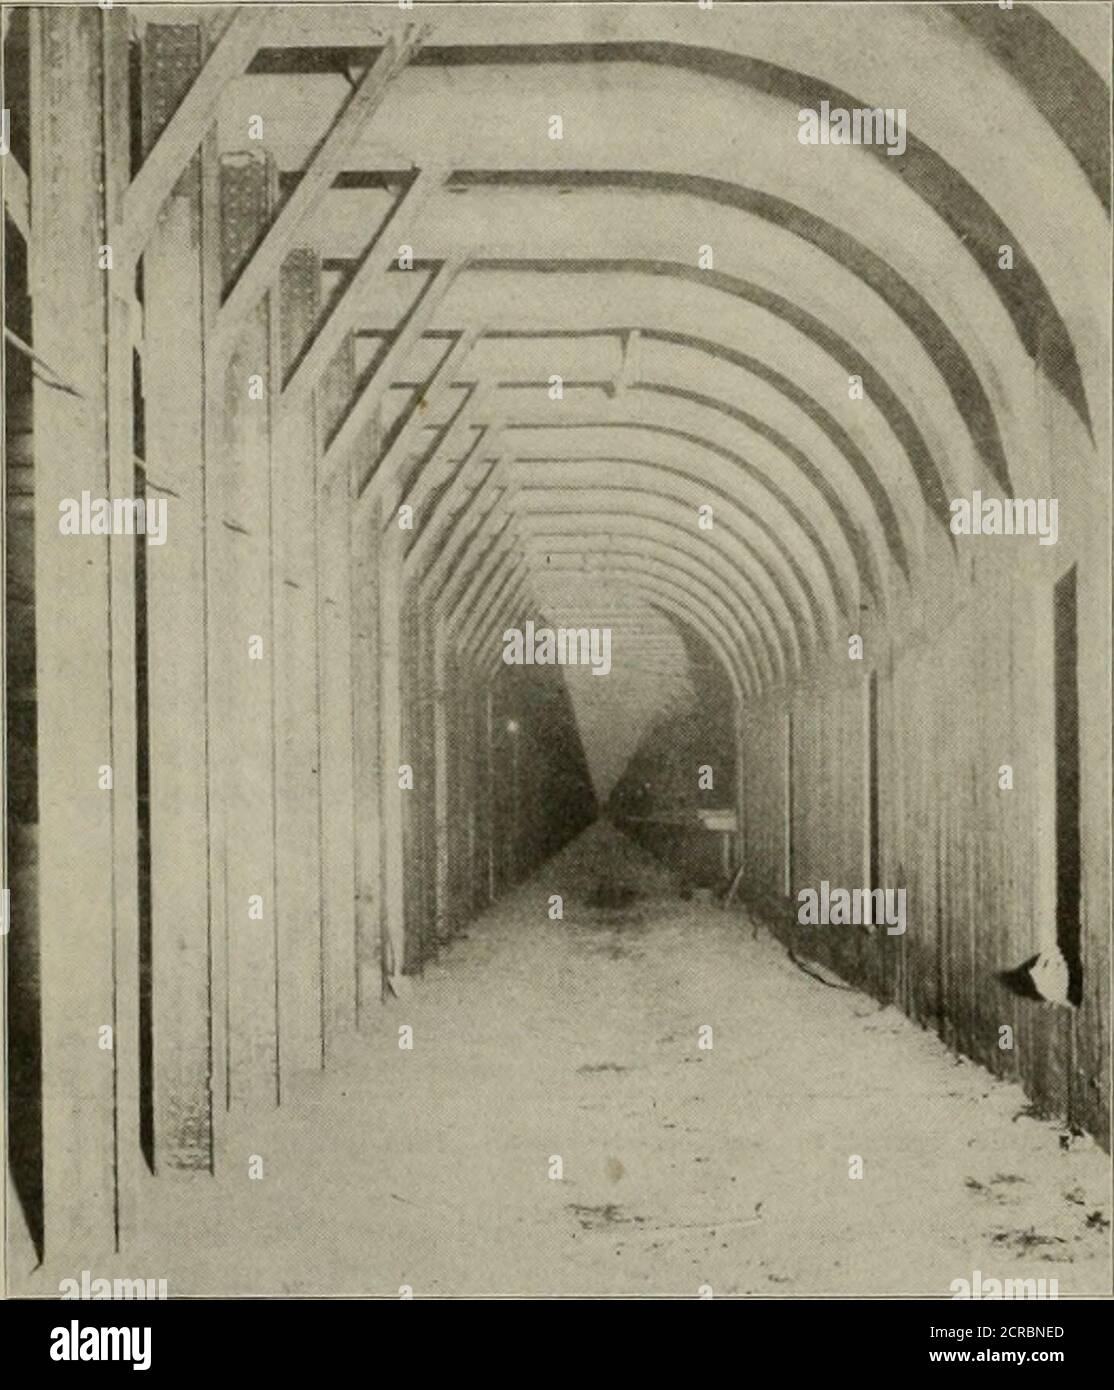 . Electric railway review . ave to be obtainedat once. Washington Street Tunnel. To obtain first relief it was decided to place a tunnelunder Washington street from near the Castle street inter-section, where the existing elevated now makes right-angledturns right and left; on the right, to the incline that leadsto the Tremont street subway; on the left, eventually, to theAtlantic avenue section. The tunnel would be reached by anincline from near this elevated junction and would terminateon the north at the Haymarket square station and incline ofthe present system. When dug and completed the W Stock Photo